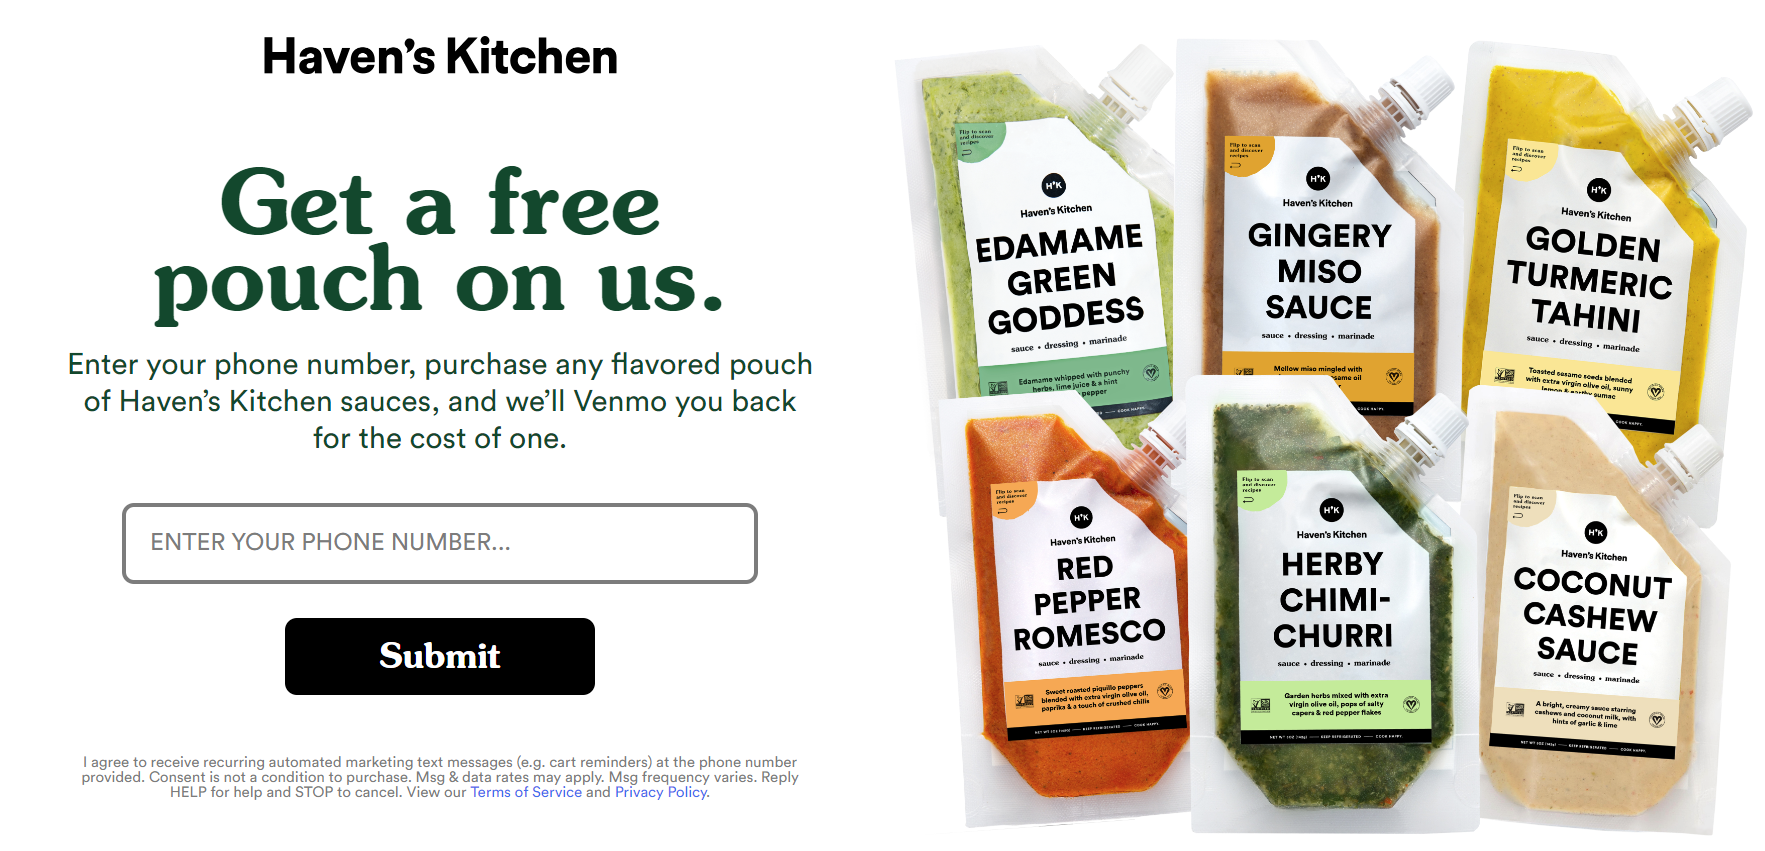 Free Haven's Kitchen Sauce After Easy Rebate - Doctor Of Credit